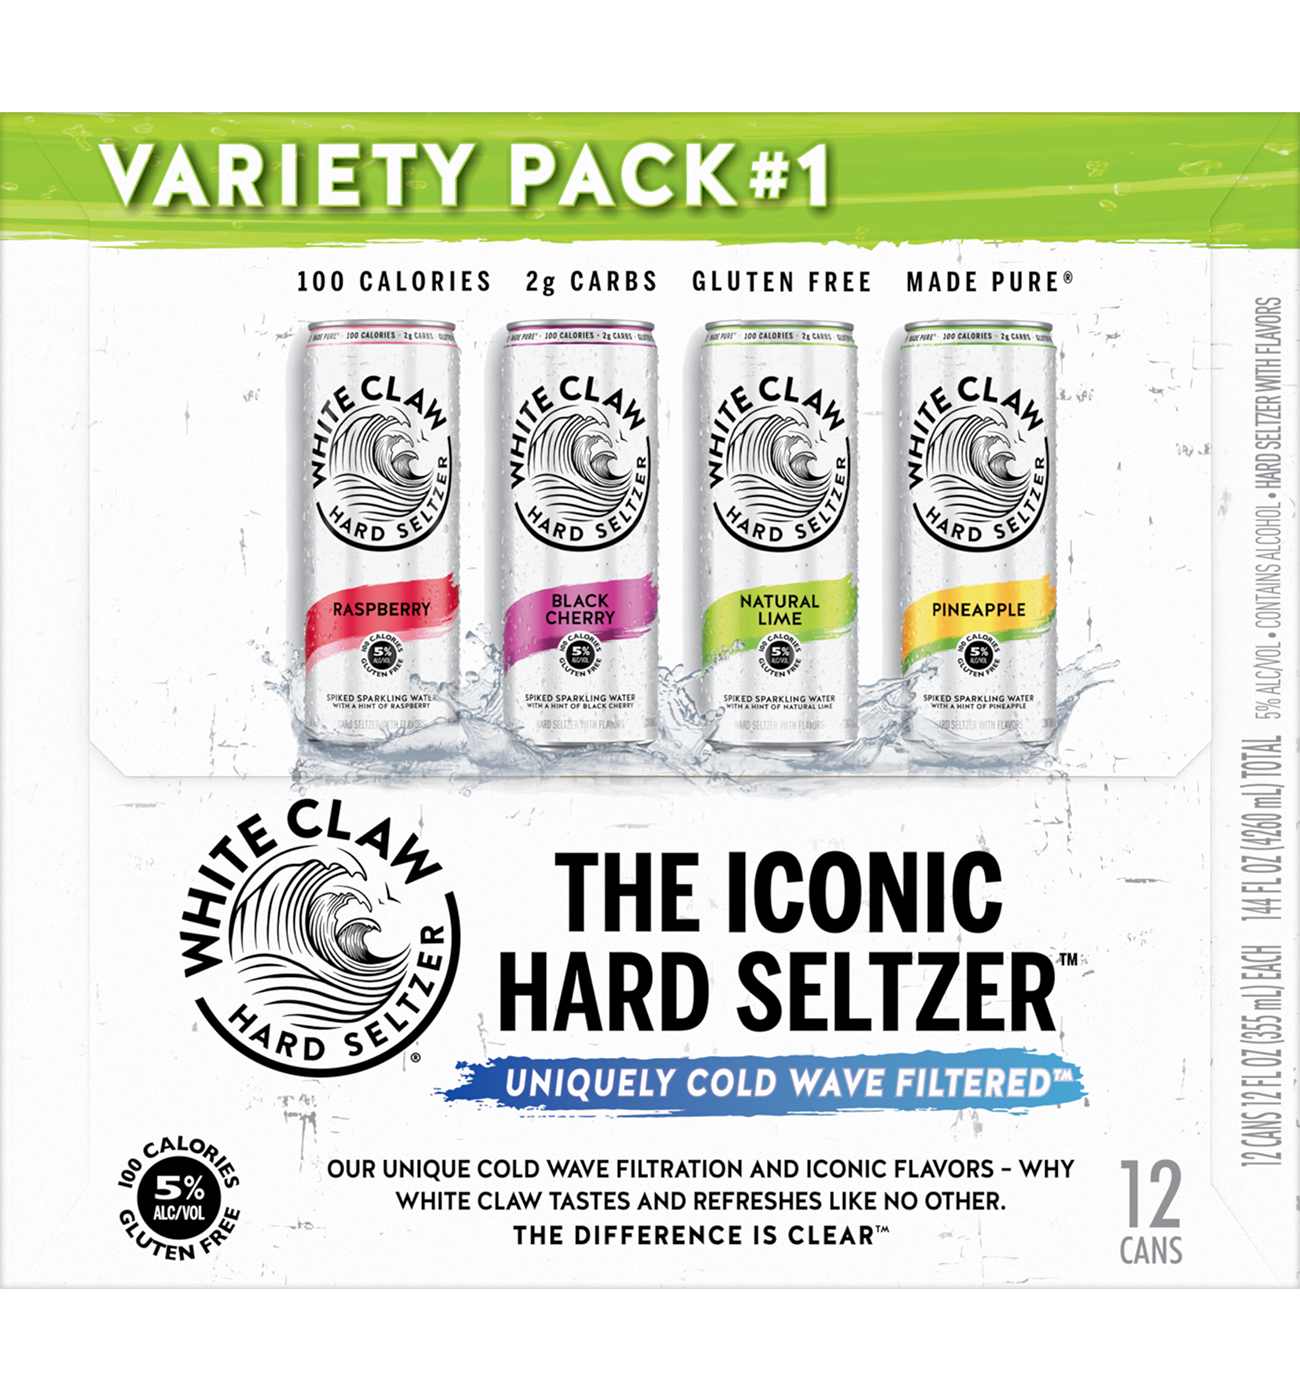 White Claw Hard Seltzer Variety Pack 12 pk Cans; image 2 of 4